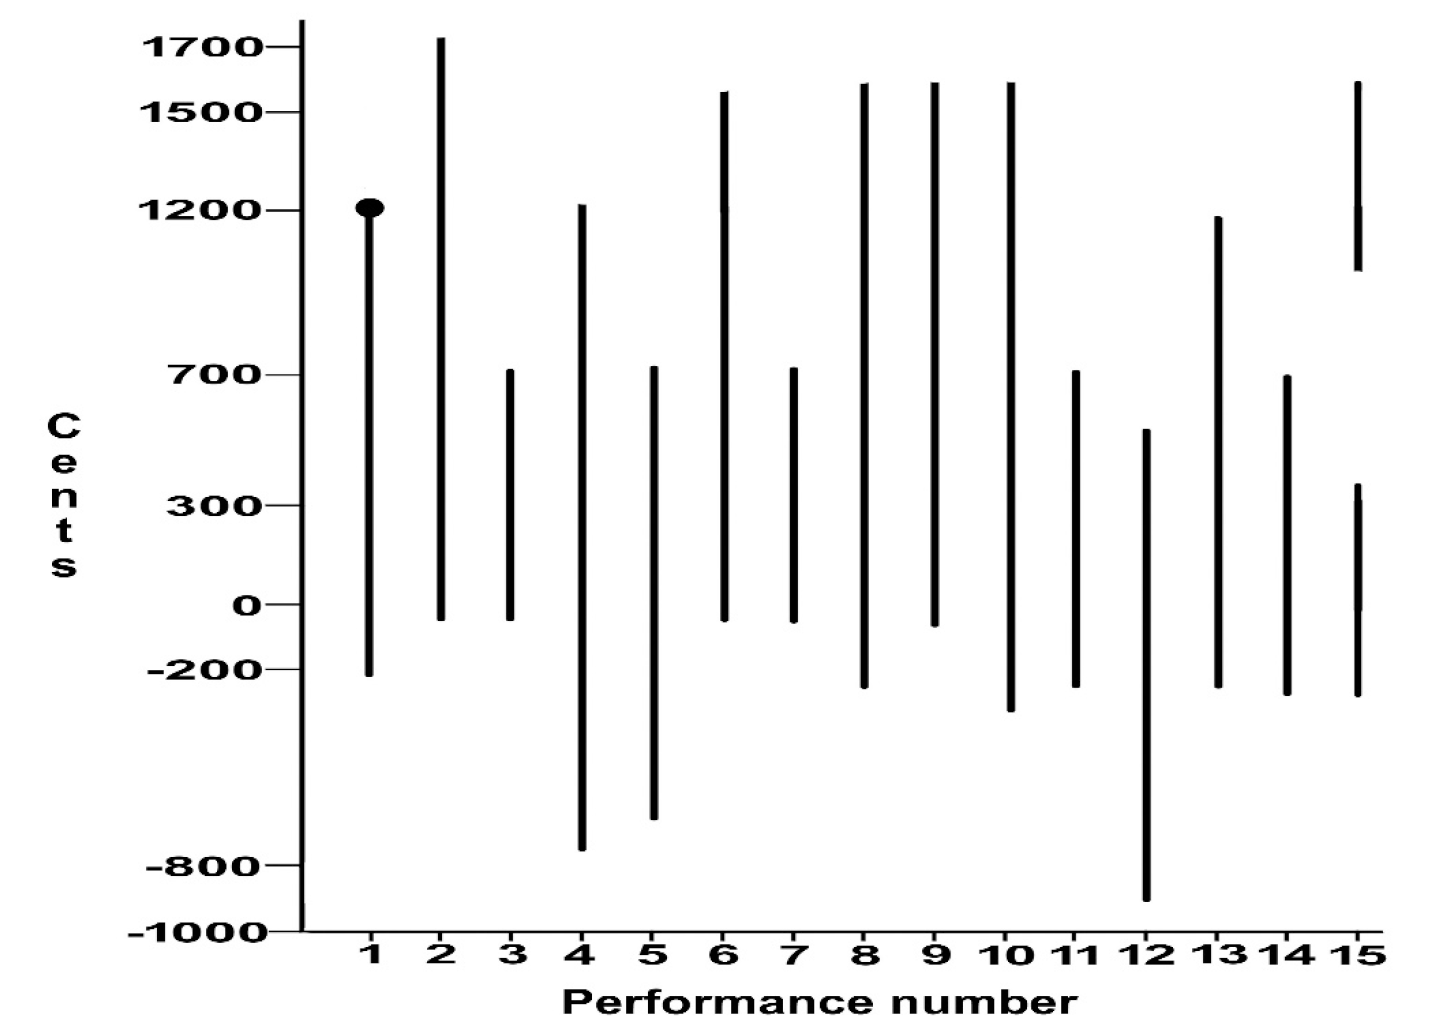 Figure 1. Raw pitch range data for performances 1-15 on a scale of -1000 to 1700 cents.